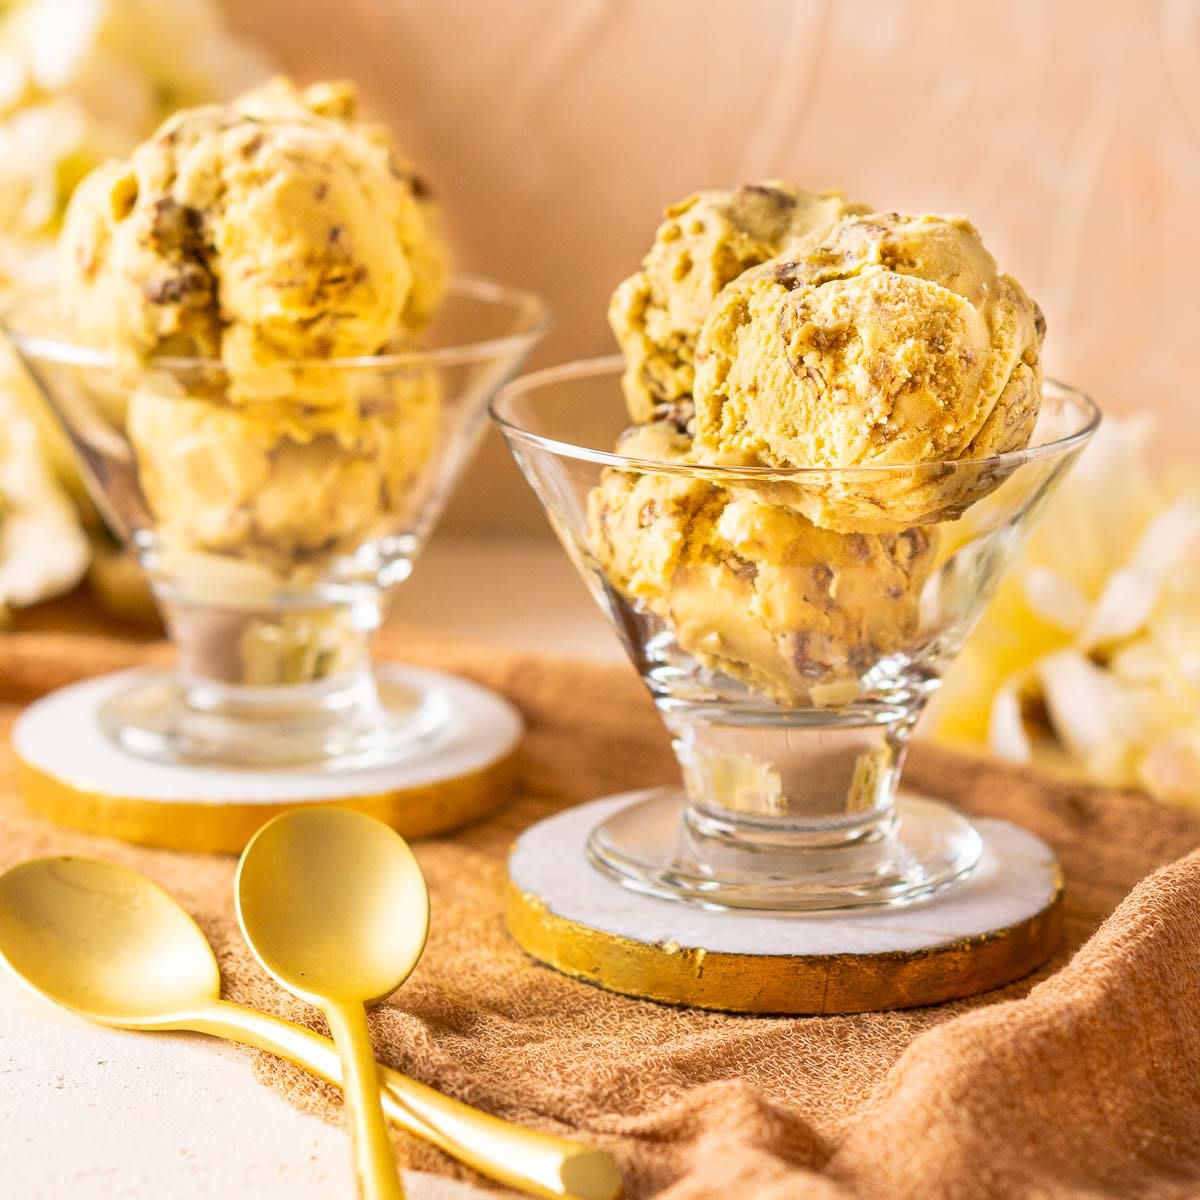 Butterscotch Ice Cream With Candied Pecans